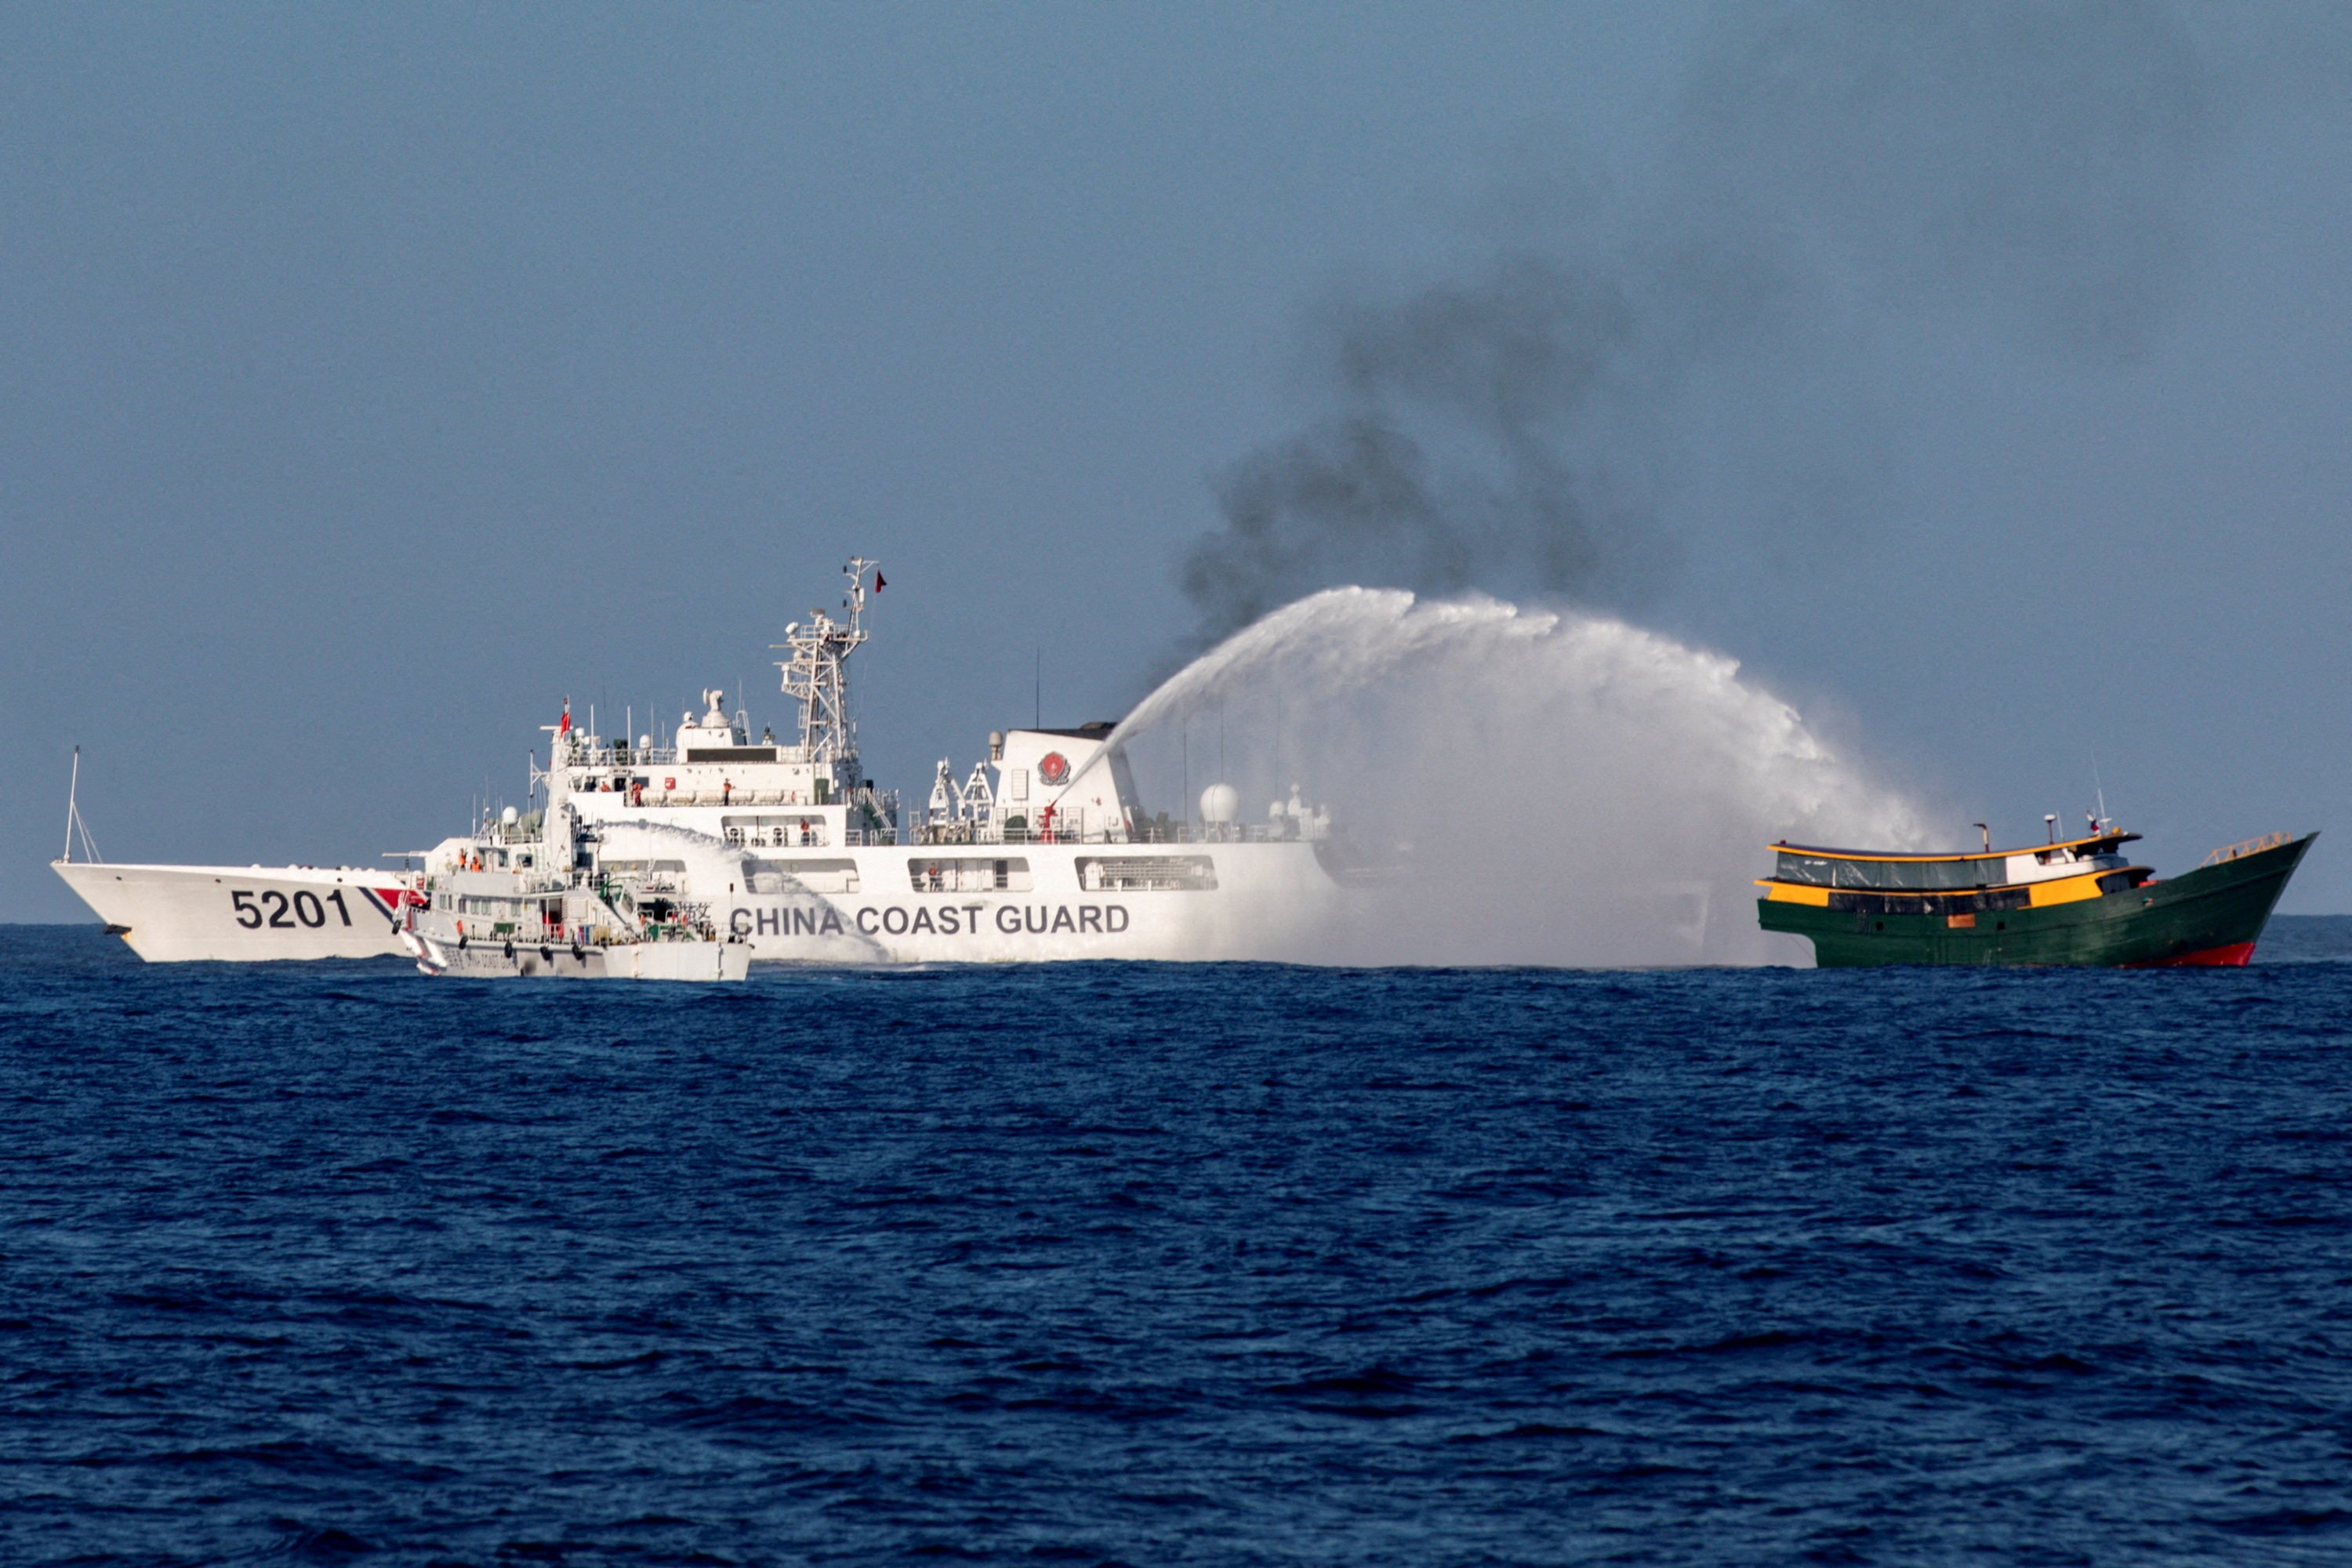 Chinese scientists have developed an AI-driven water cannon which it intends to use in clashes in the South China Sea. Photo: Reuters